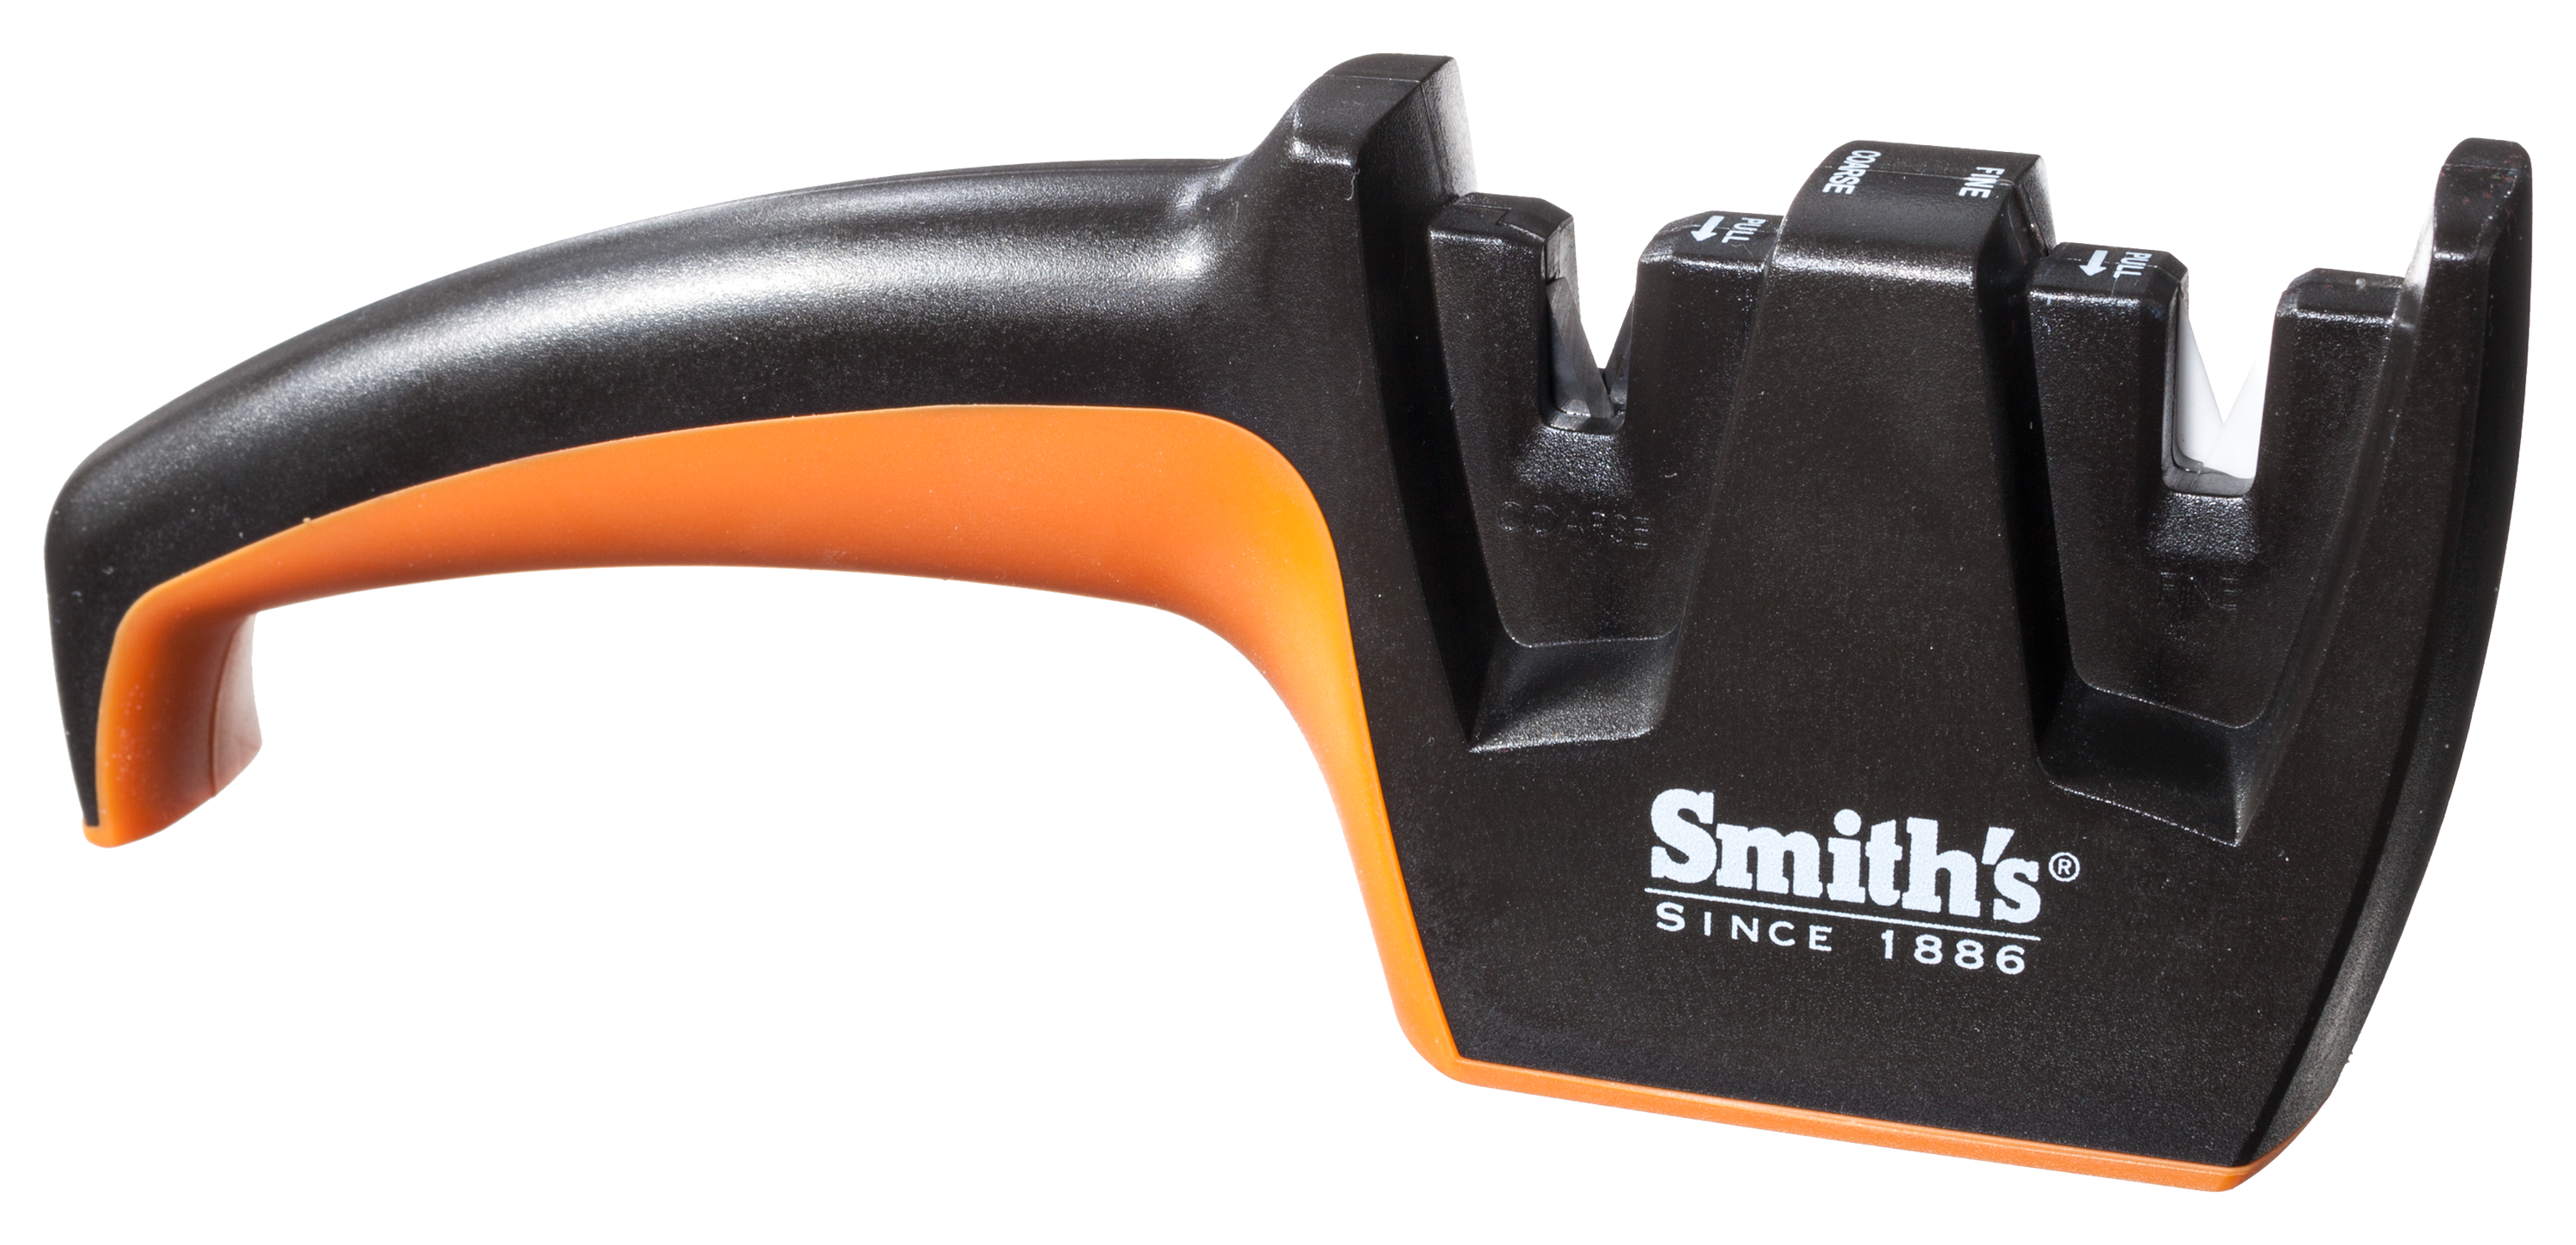 Smith's Electric Belt Knife Sharpener: Easy To Use! 